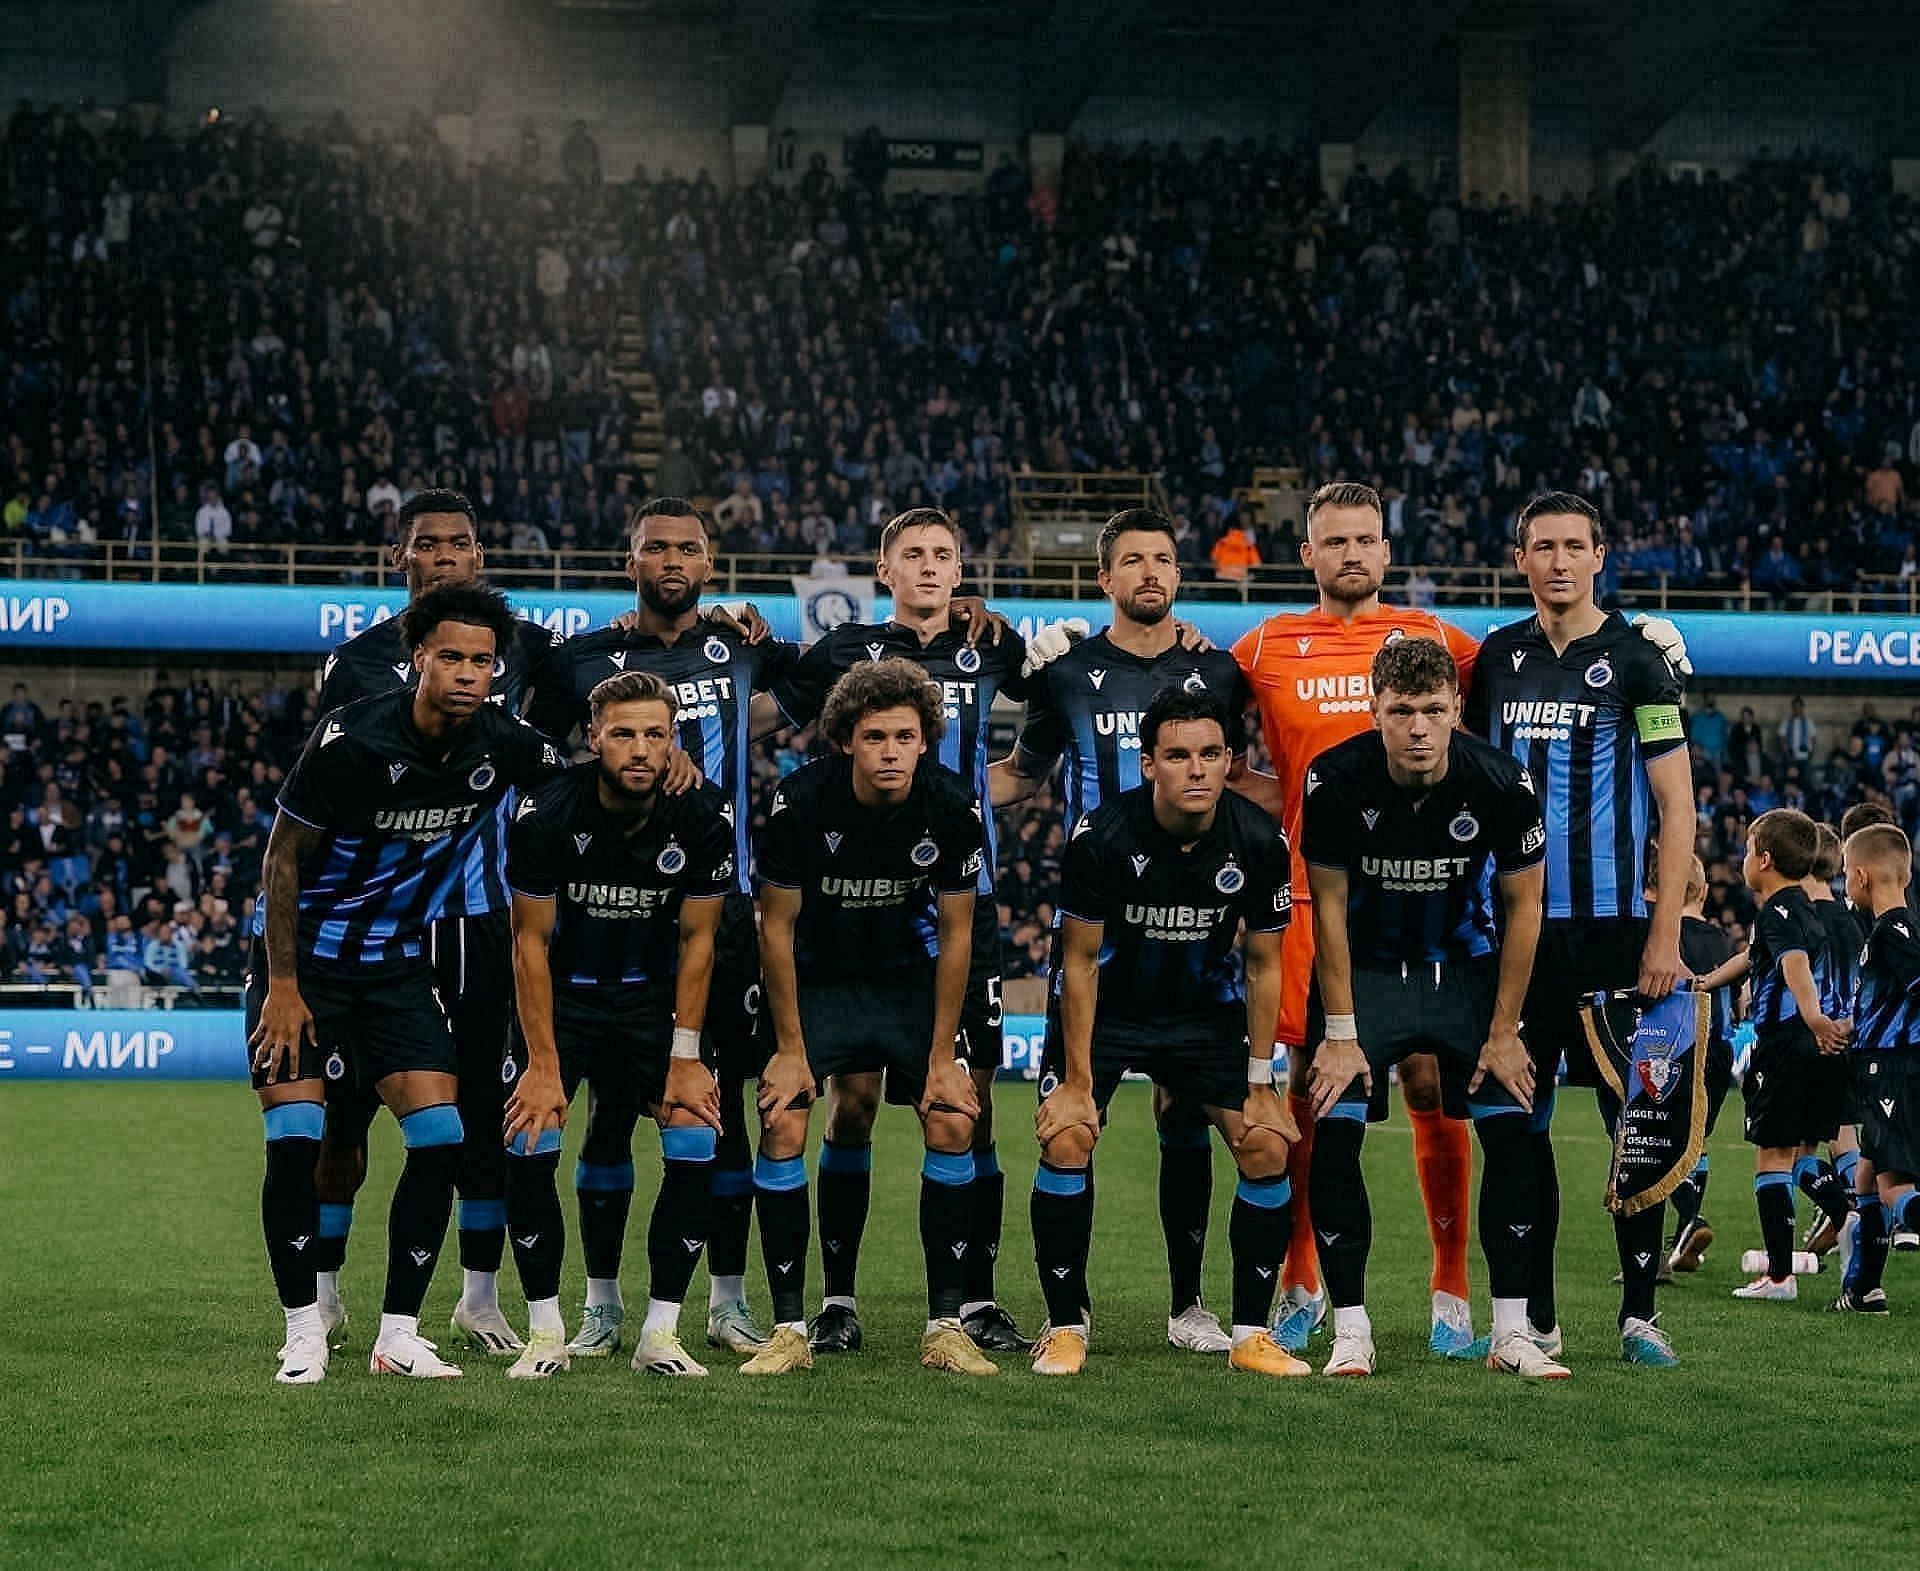 Club Brugge will face Cercle Brugge on Sunday 